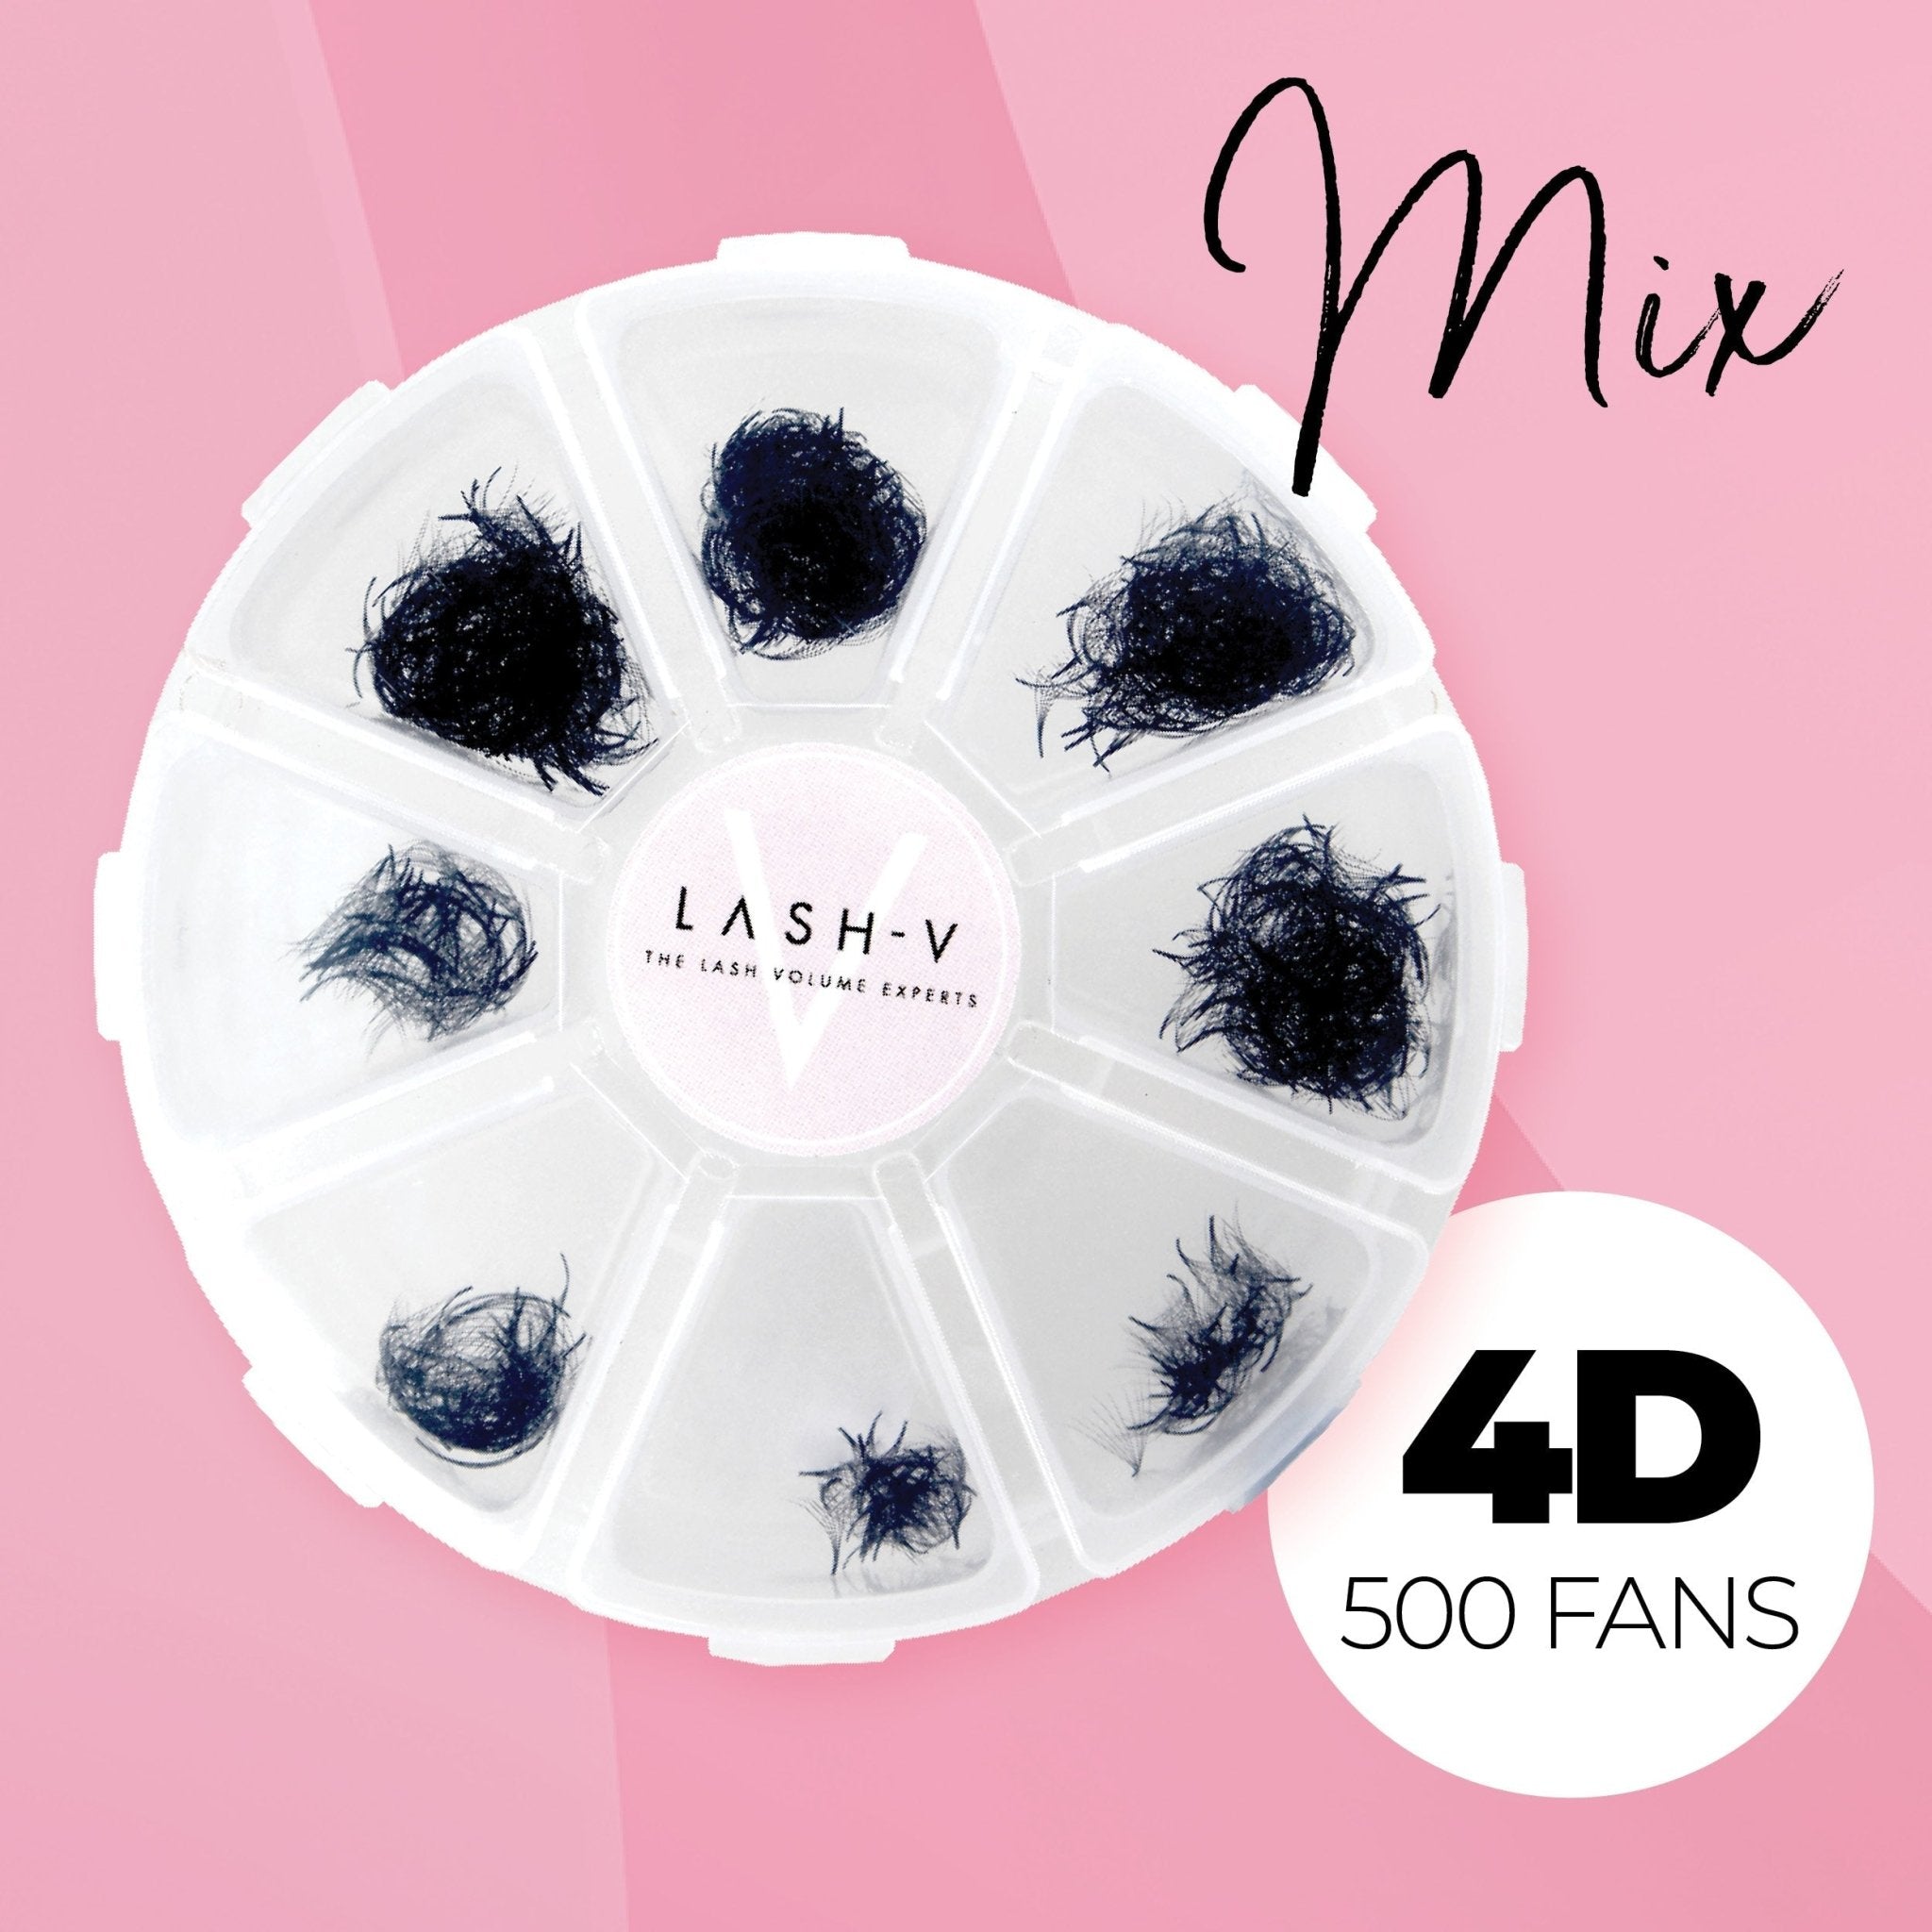 4D Promade Loose - 500 Mix Fans - One V Salon